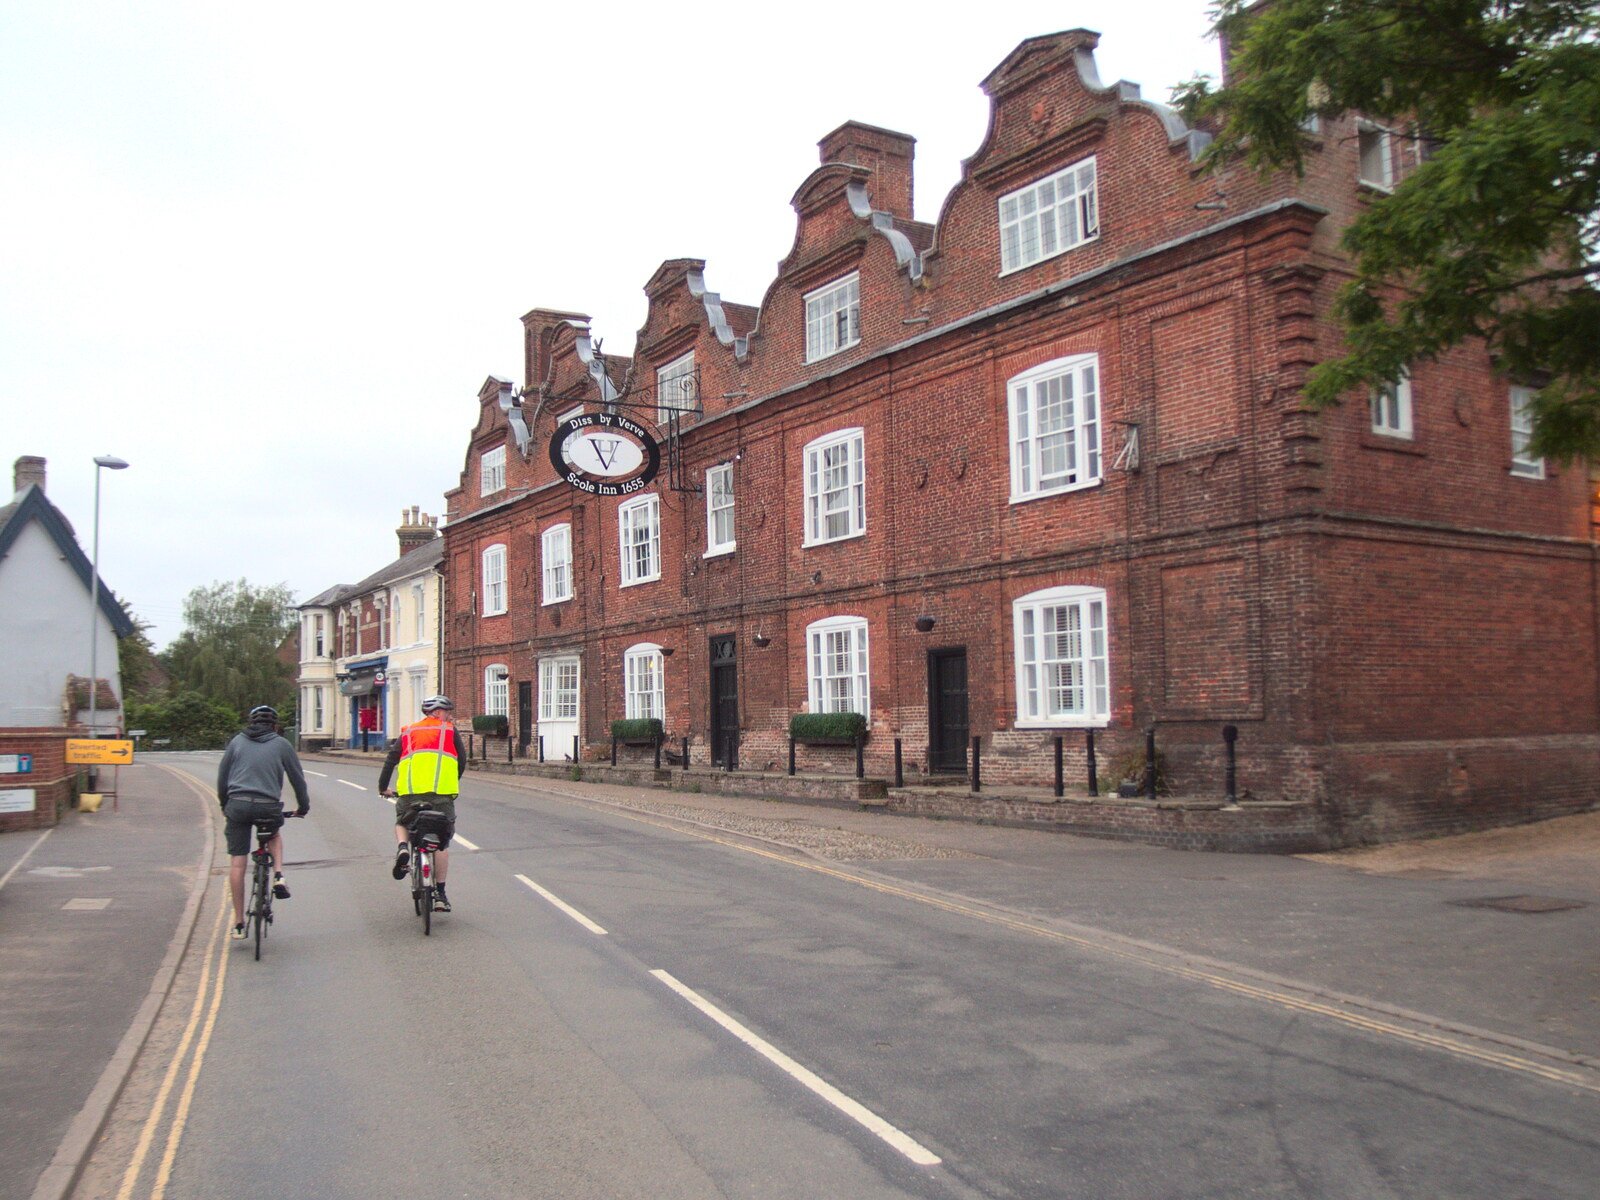 The Scole Inn in, er, Scole from A BSCC Ride to Pulham Market, Norfolk - 17th June 2021